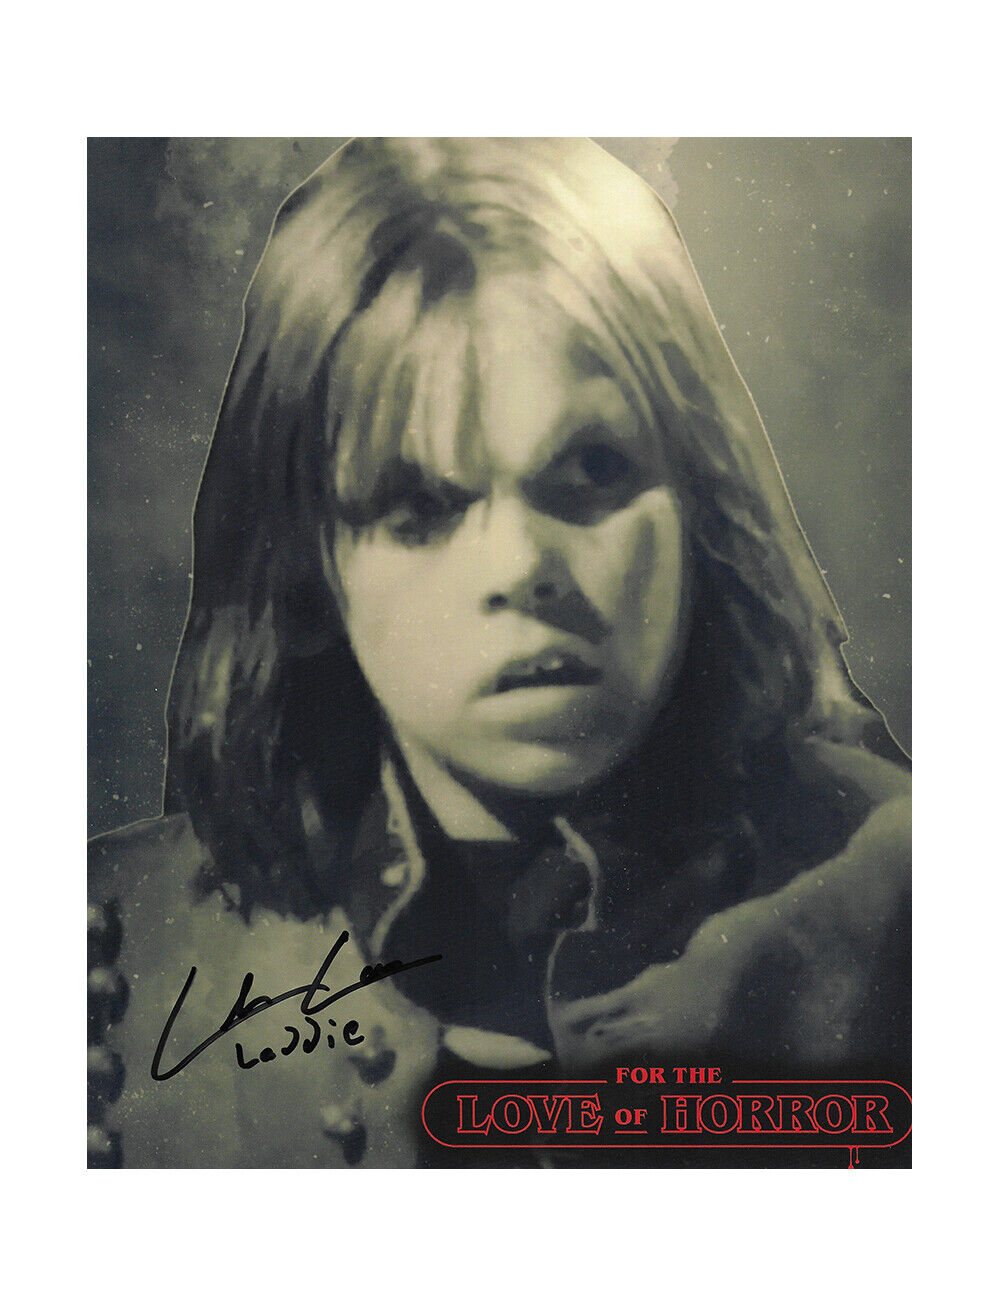 8x10 The Lost Boys Print Signed by Chance Michael Corbitt 100% Authentic + COA